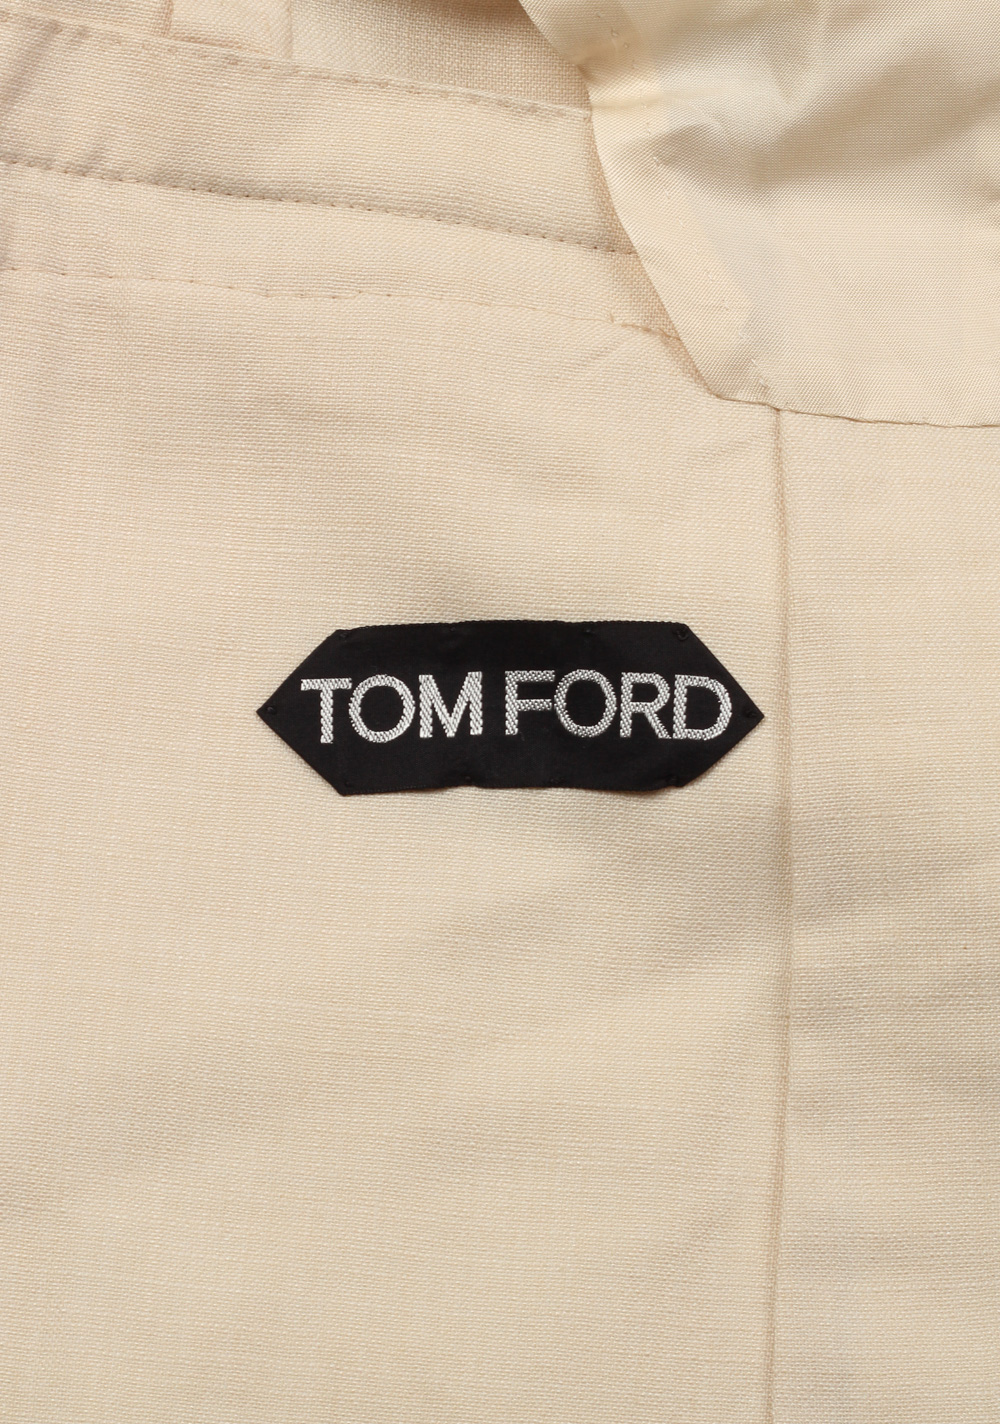 TOM FORD Shelton Cream Suit Size 46 / 36R U.S. In Wool Silk | Costume ...